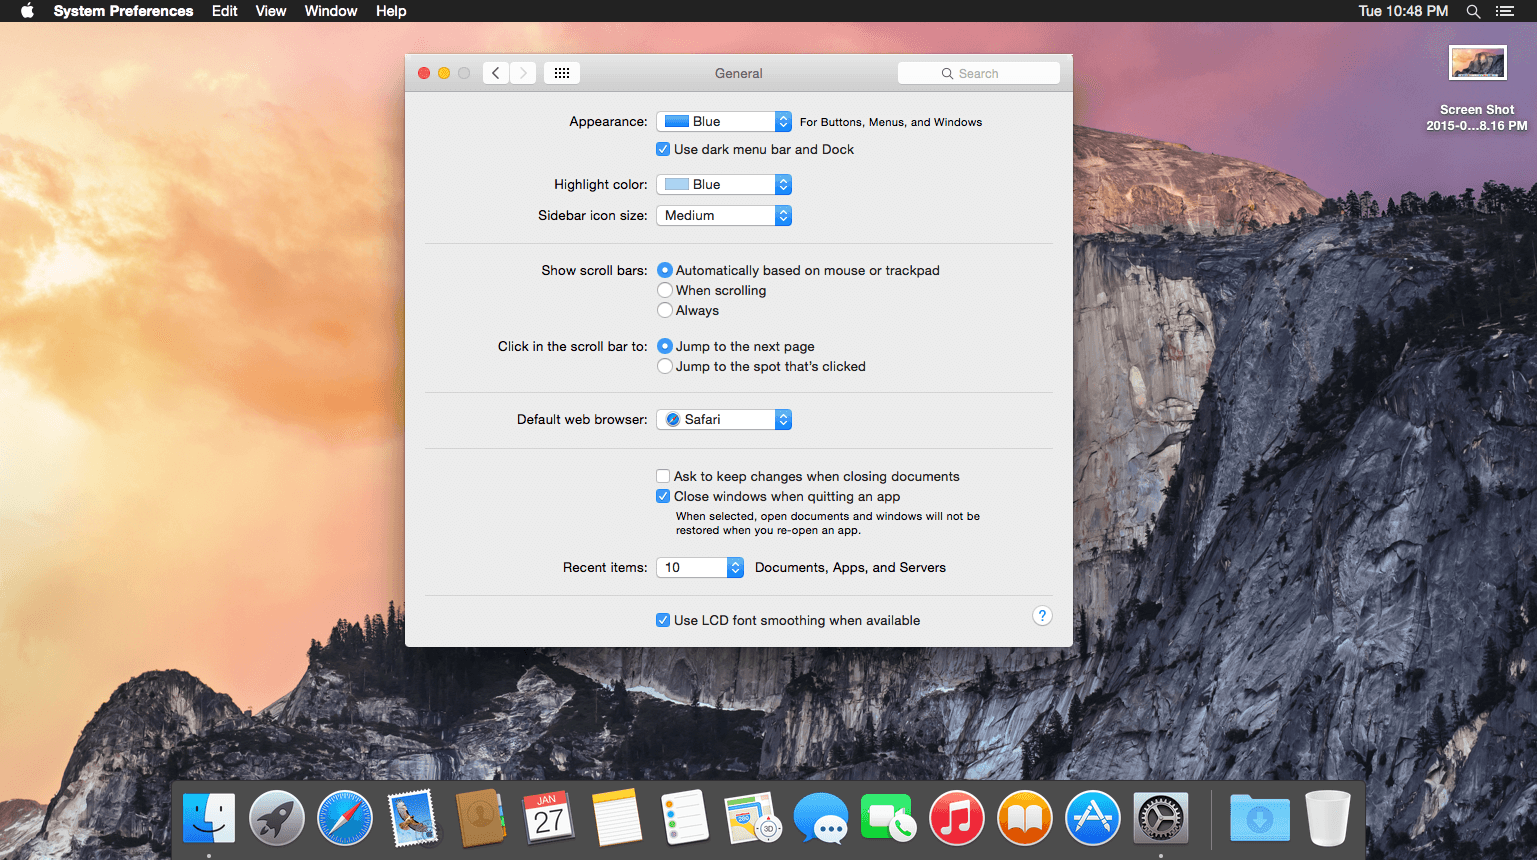 download yosemite install for older unsupported mac